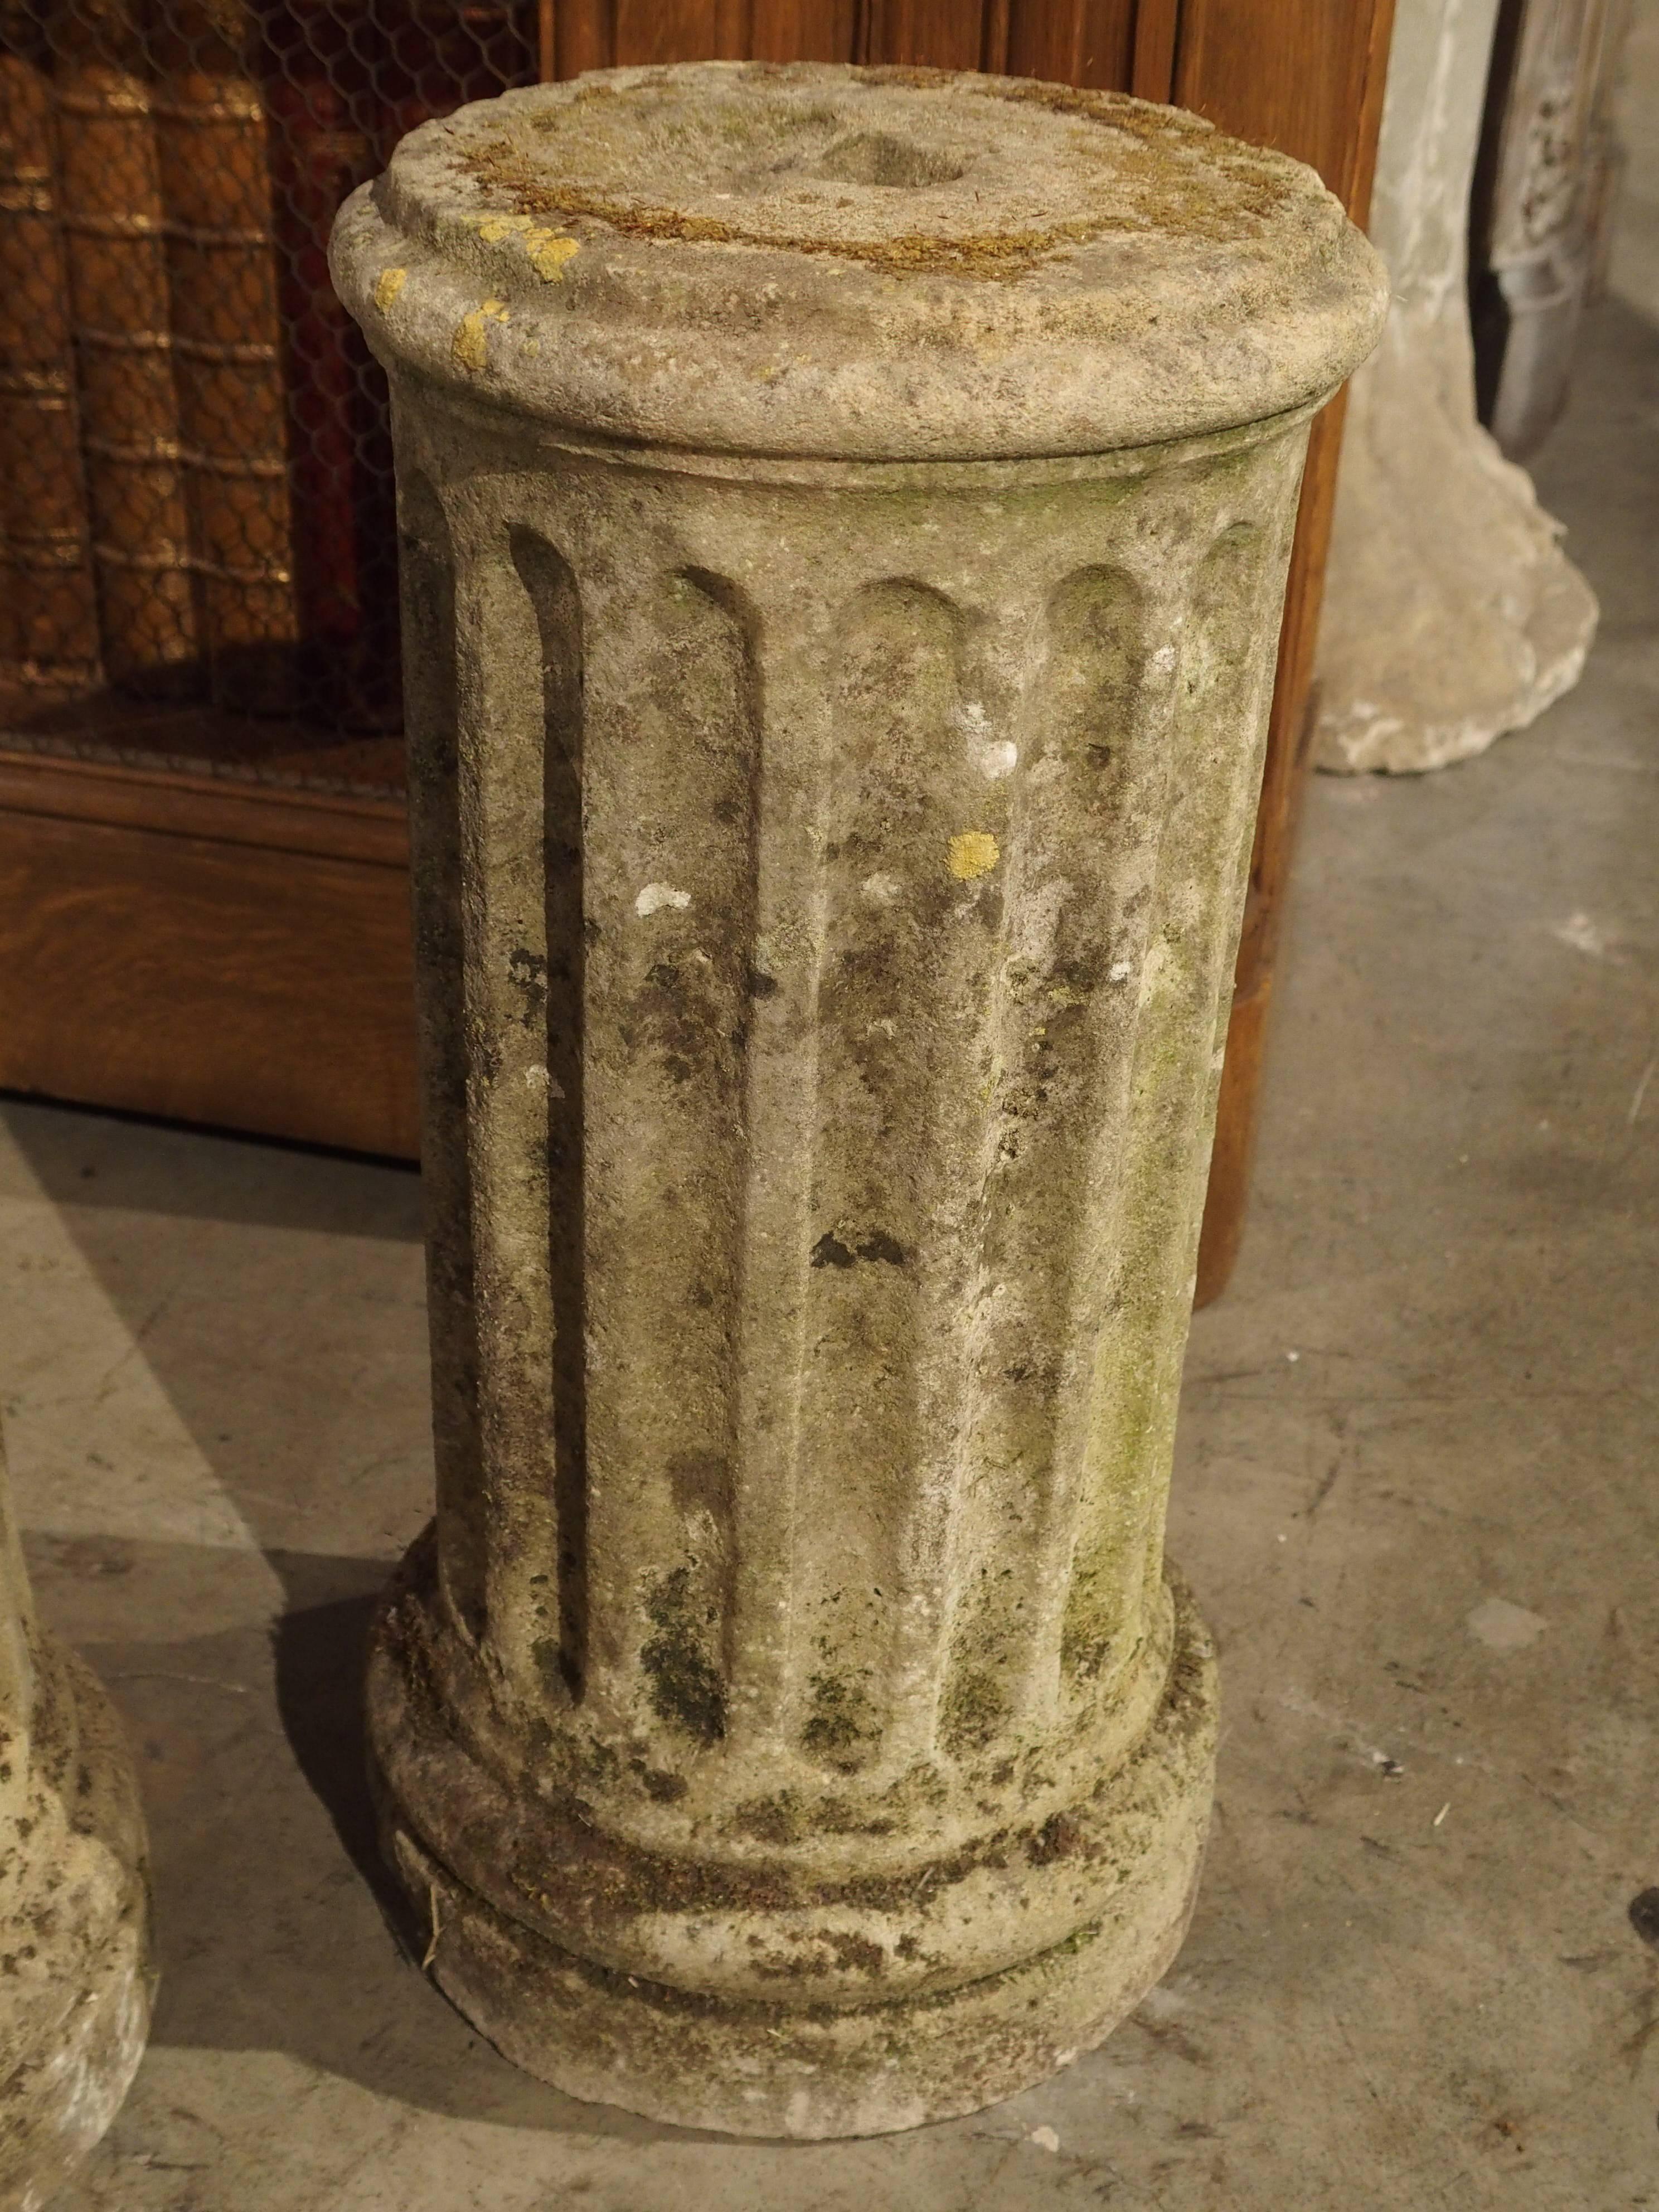 These small Period Louis XVI stone columns are fluted with round tops and bases. They are very old, dating to the late 1700s and are wonderful accessories that can be placed anywhere on their own or as a support for any decorative item. Of course,